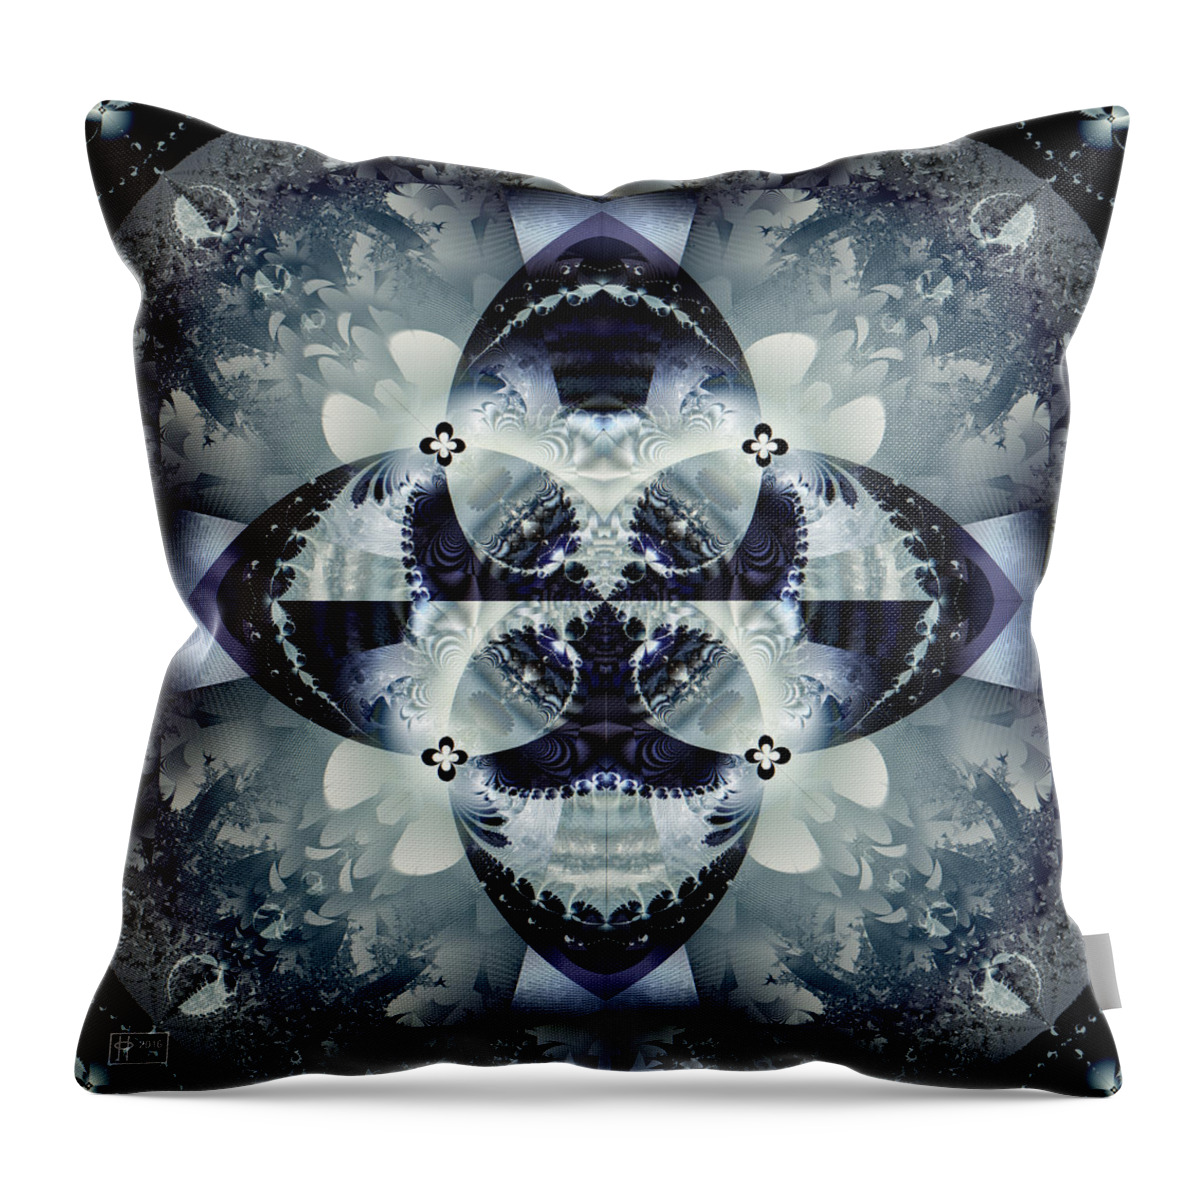 Abstract Throw Pillow featuring the digital art Wolf's Bane by Jim Pavelle